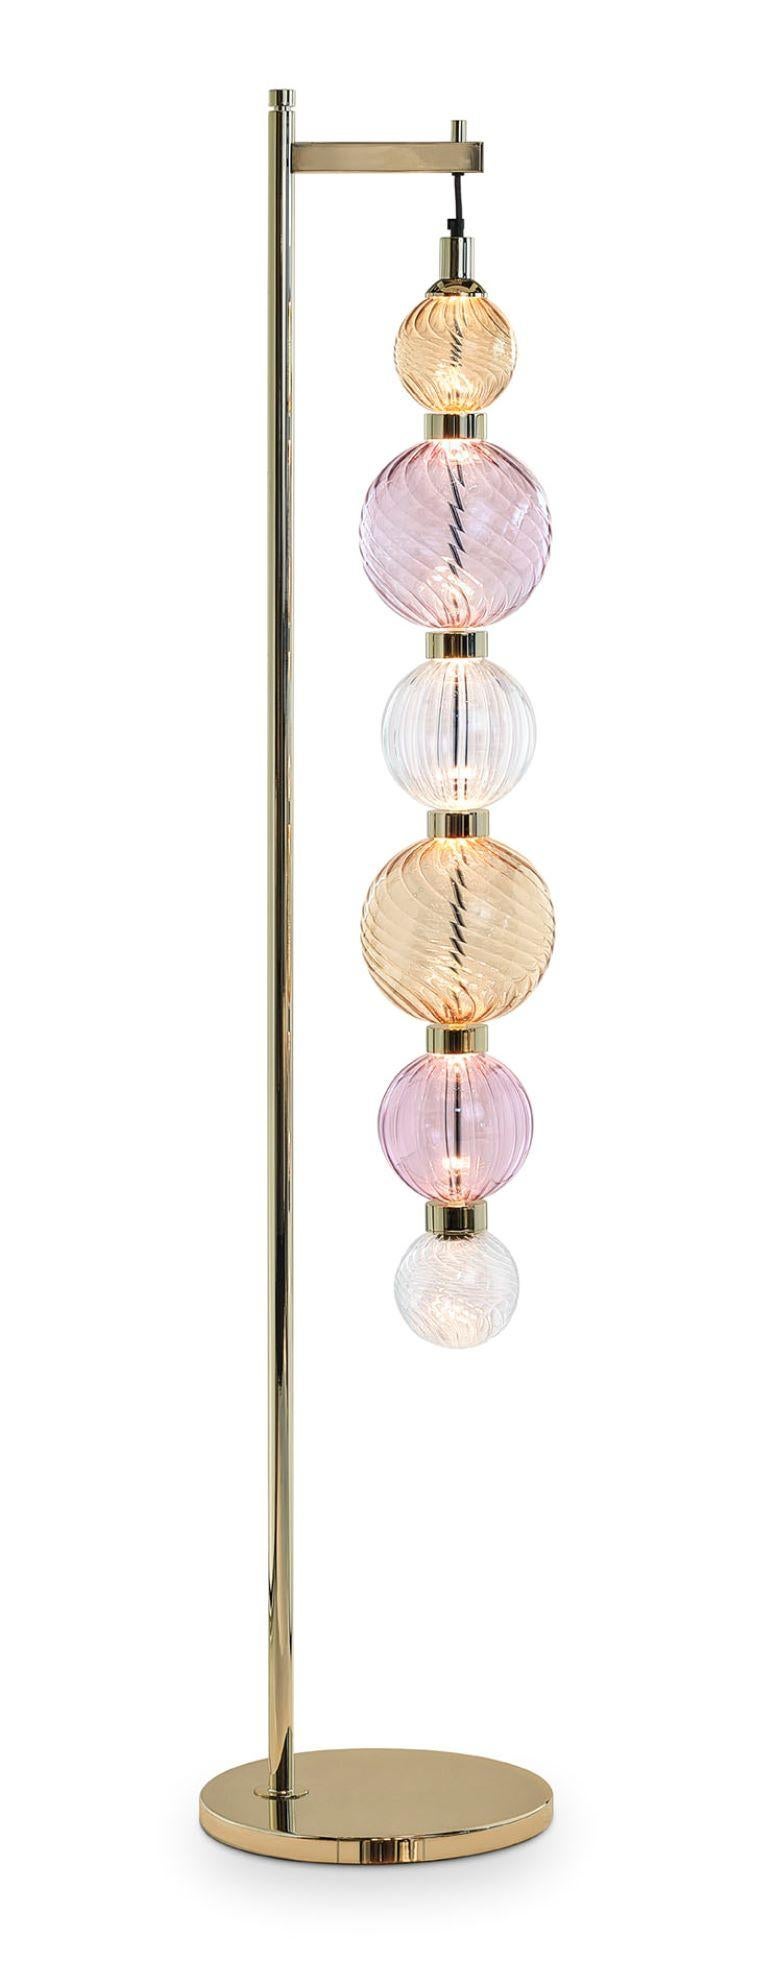 Modern Floor Lamp Polished Champagne or Chrome Finish Murano Glass Spheres Customizable For Sale